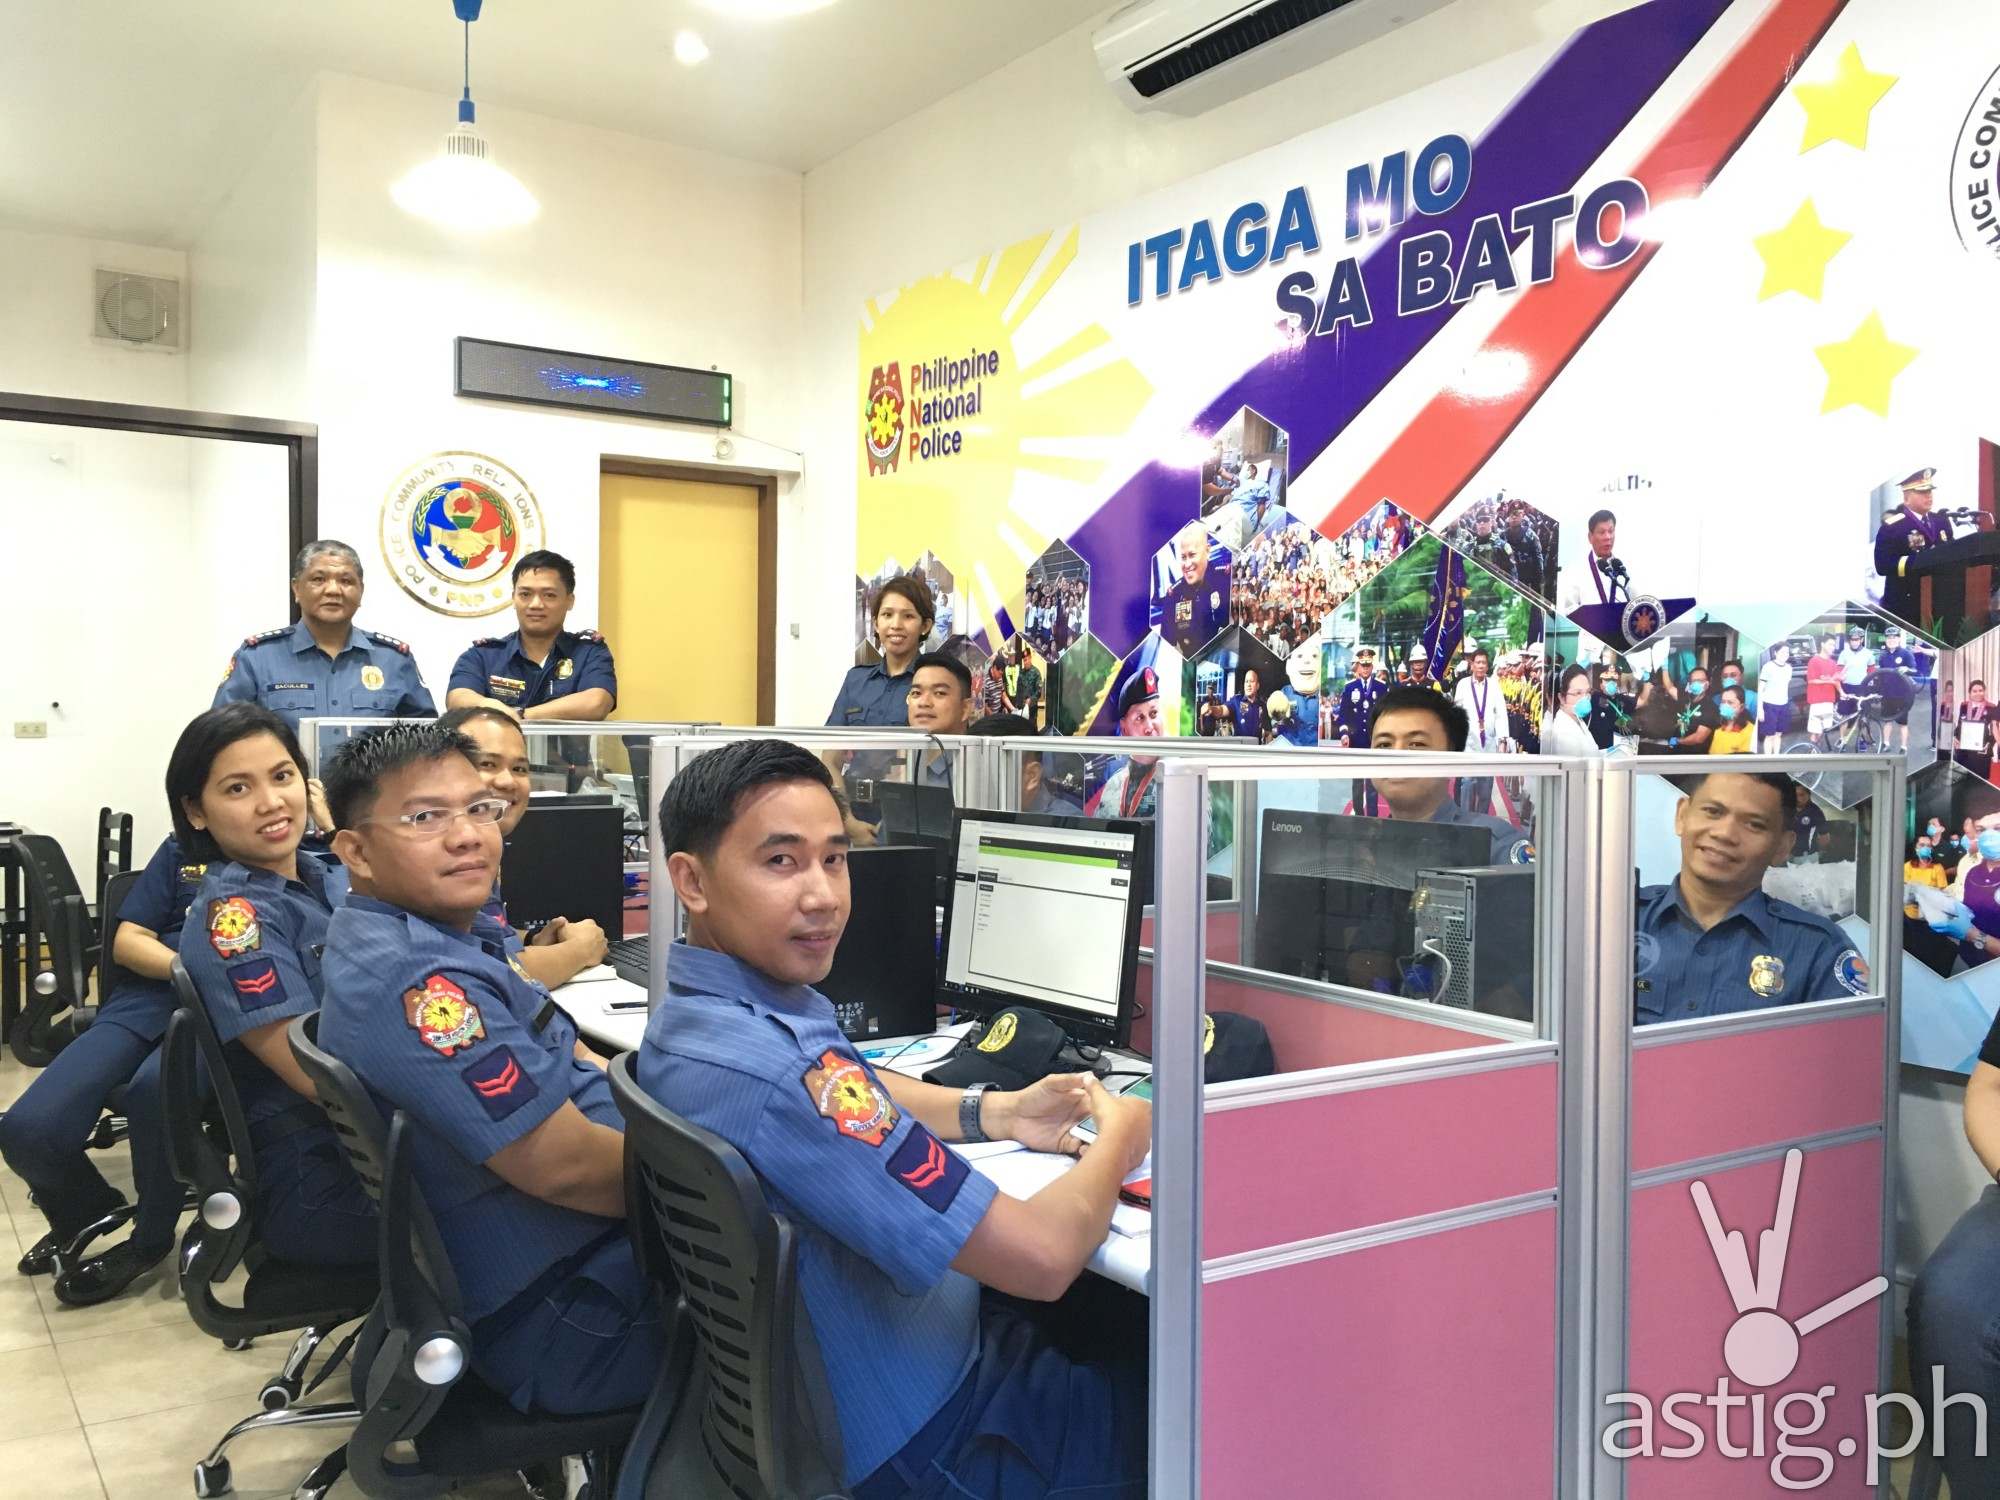 The PNP Police Quick Response Center is now operational 24/7